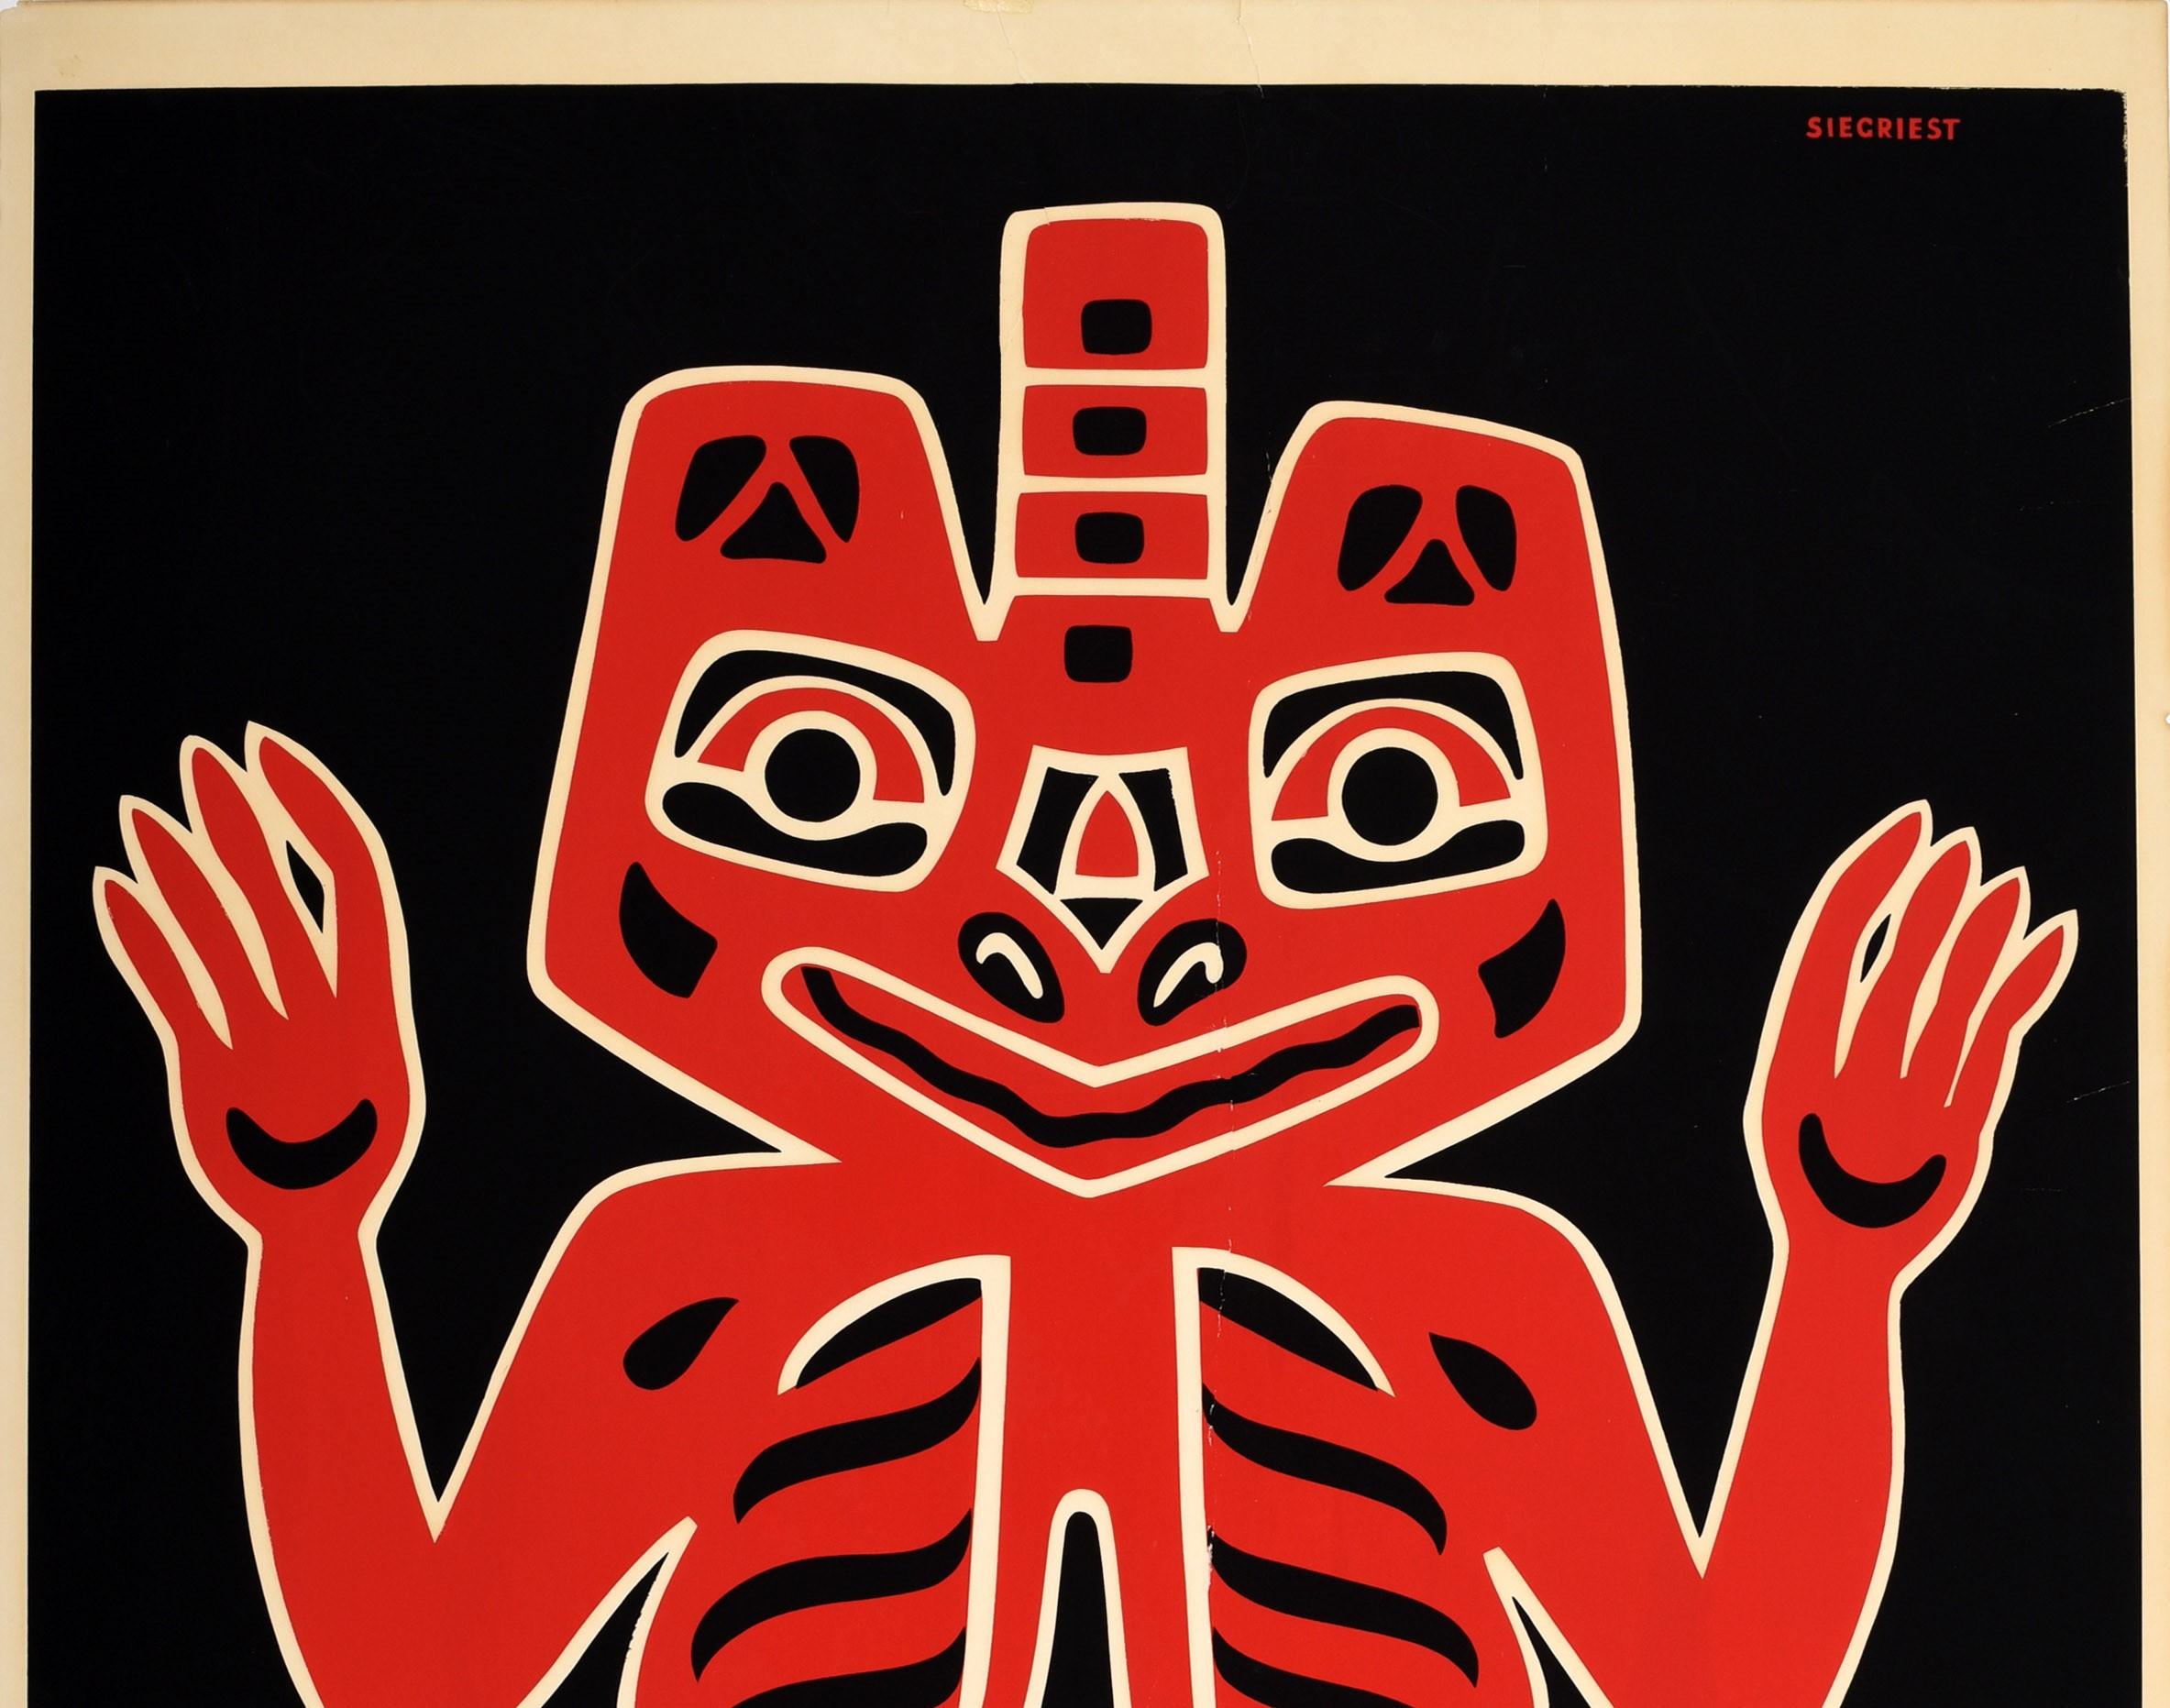 Original vintage exhibition poster featuring artwork by Louis Siegriest (1899-1990) depicting a Blanket Design of the Haida Indians Alaska in red against a black background with the bold text in stylised red, blue and white lettering below - Indian